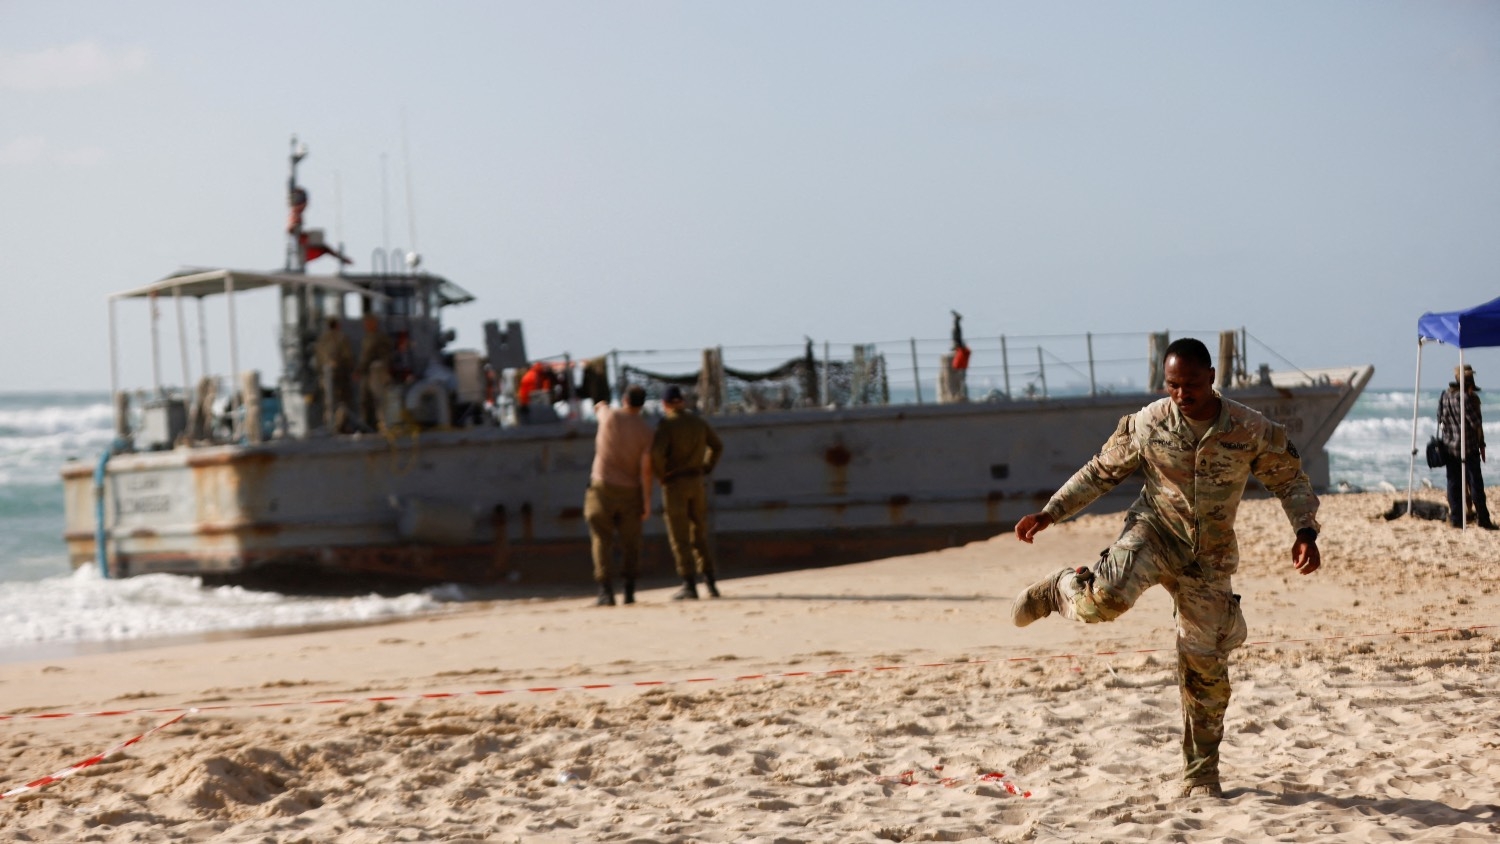 A US soldier leaves a cordoned-off area as other troops work on a beached vessel used for delivering aid to Palestinians via the US-built pier in Gaza on the Mediterranean coast in Ashdod, Israel on 25 May 2024.